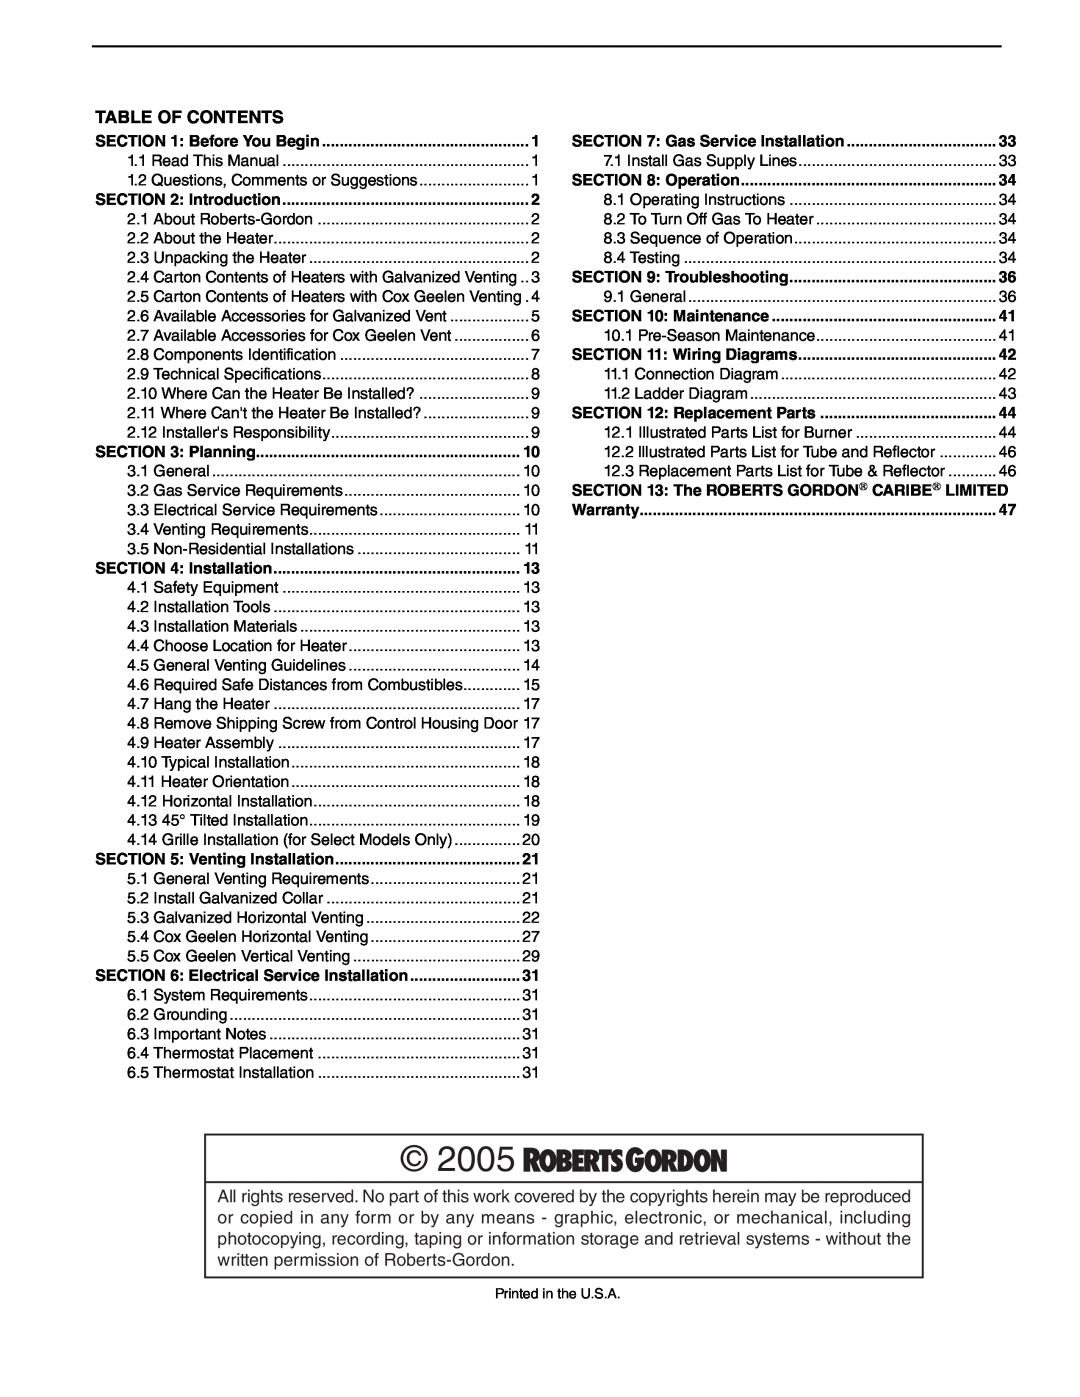 Roberts Gorden CGTH-30, CGTH-50, CGTH-40 service manual 2005, Table Of Contents 